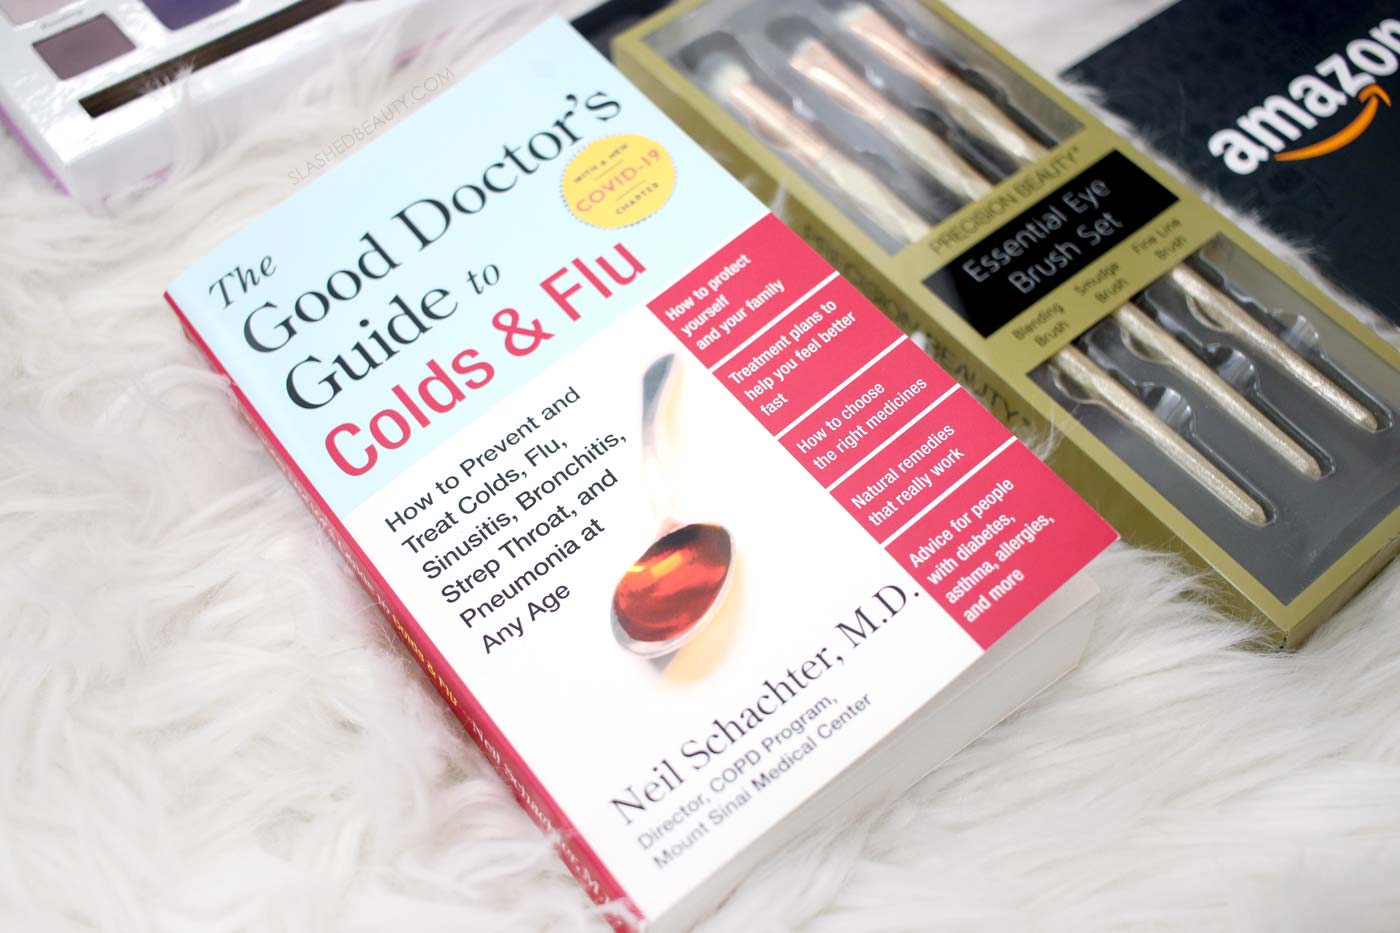 The Good Doctor’s Guide to Colds & Flu by Neil Schacter, M.D. | 2021 Essentials Giveaway: Masks, Makeup & Amazon Gift Card! | Slashed Beauty